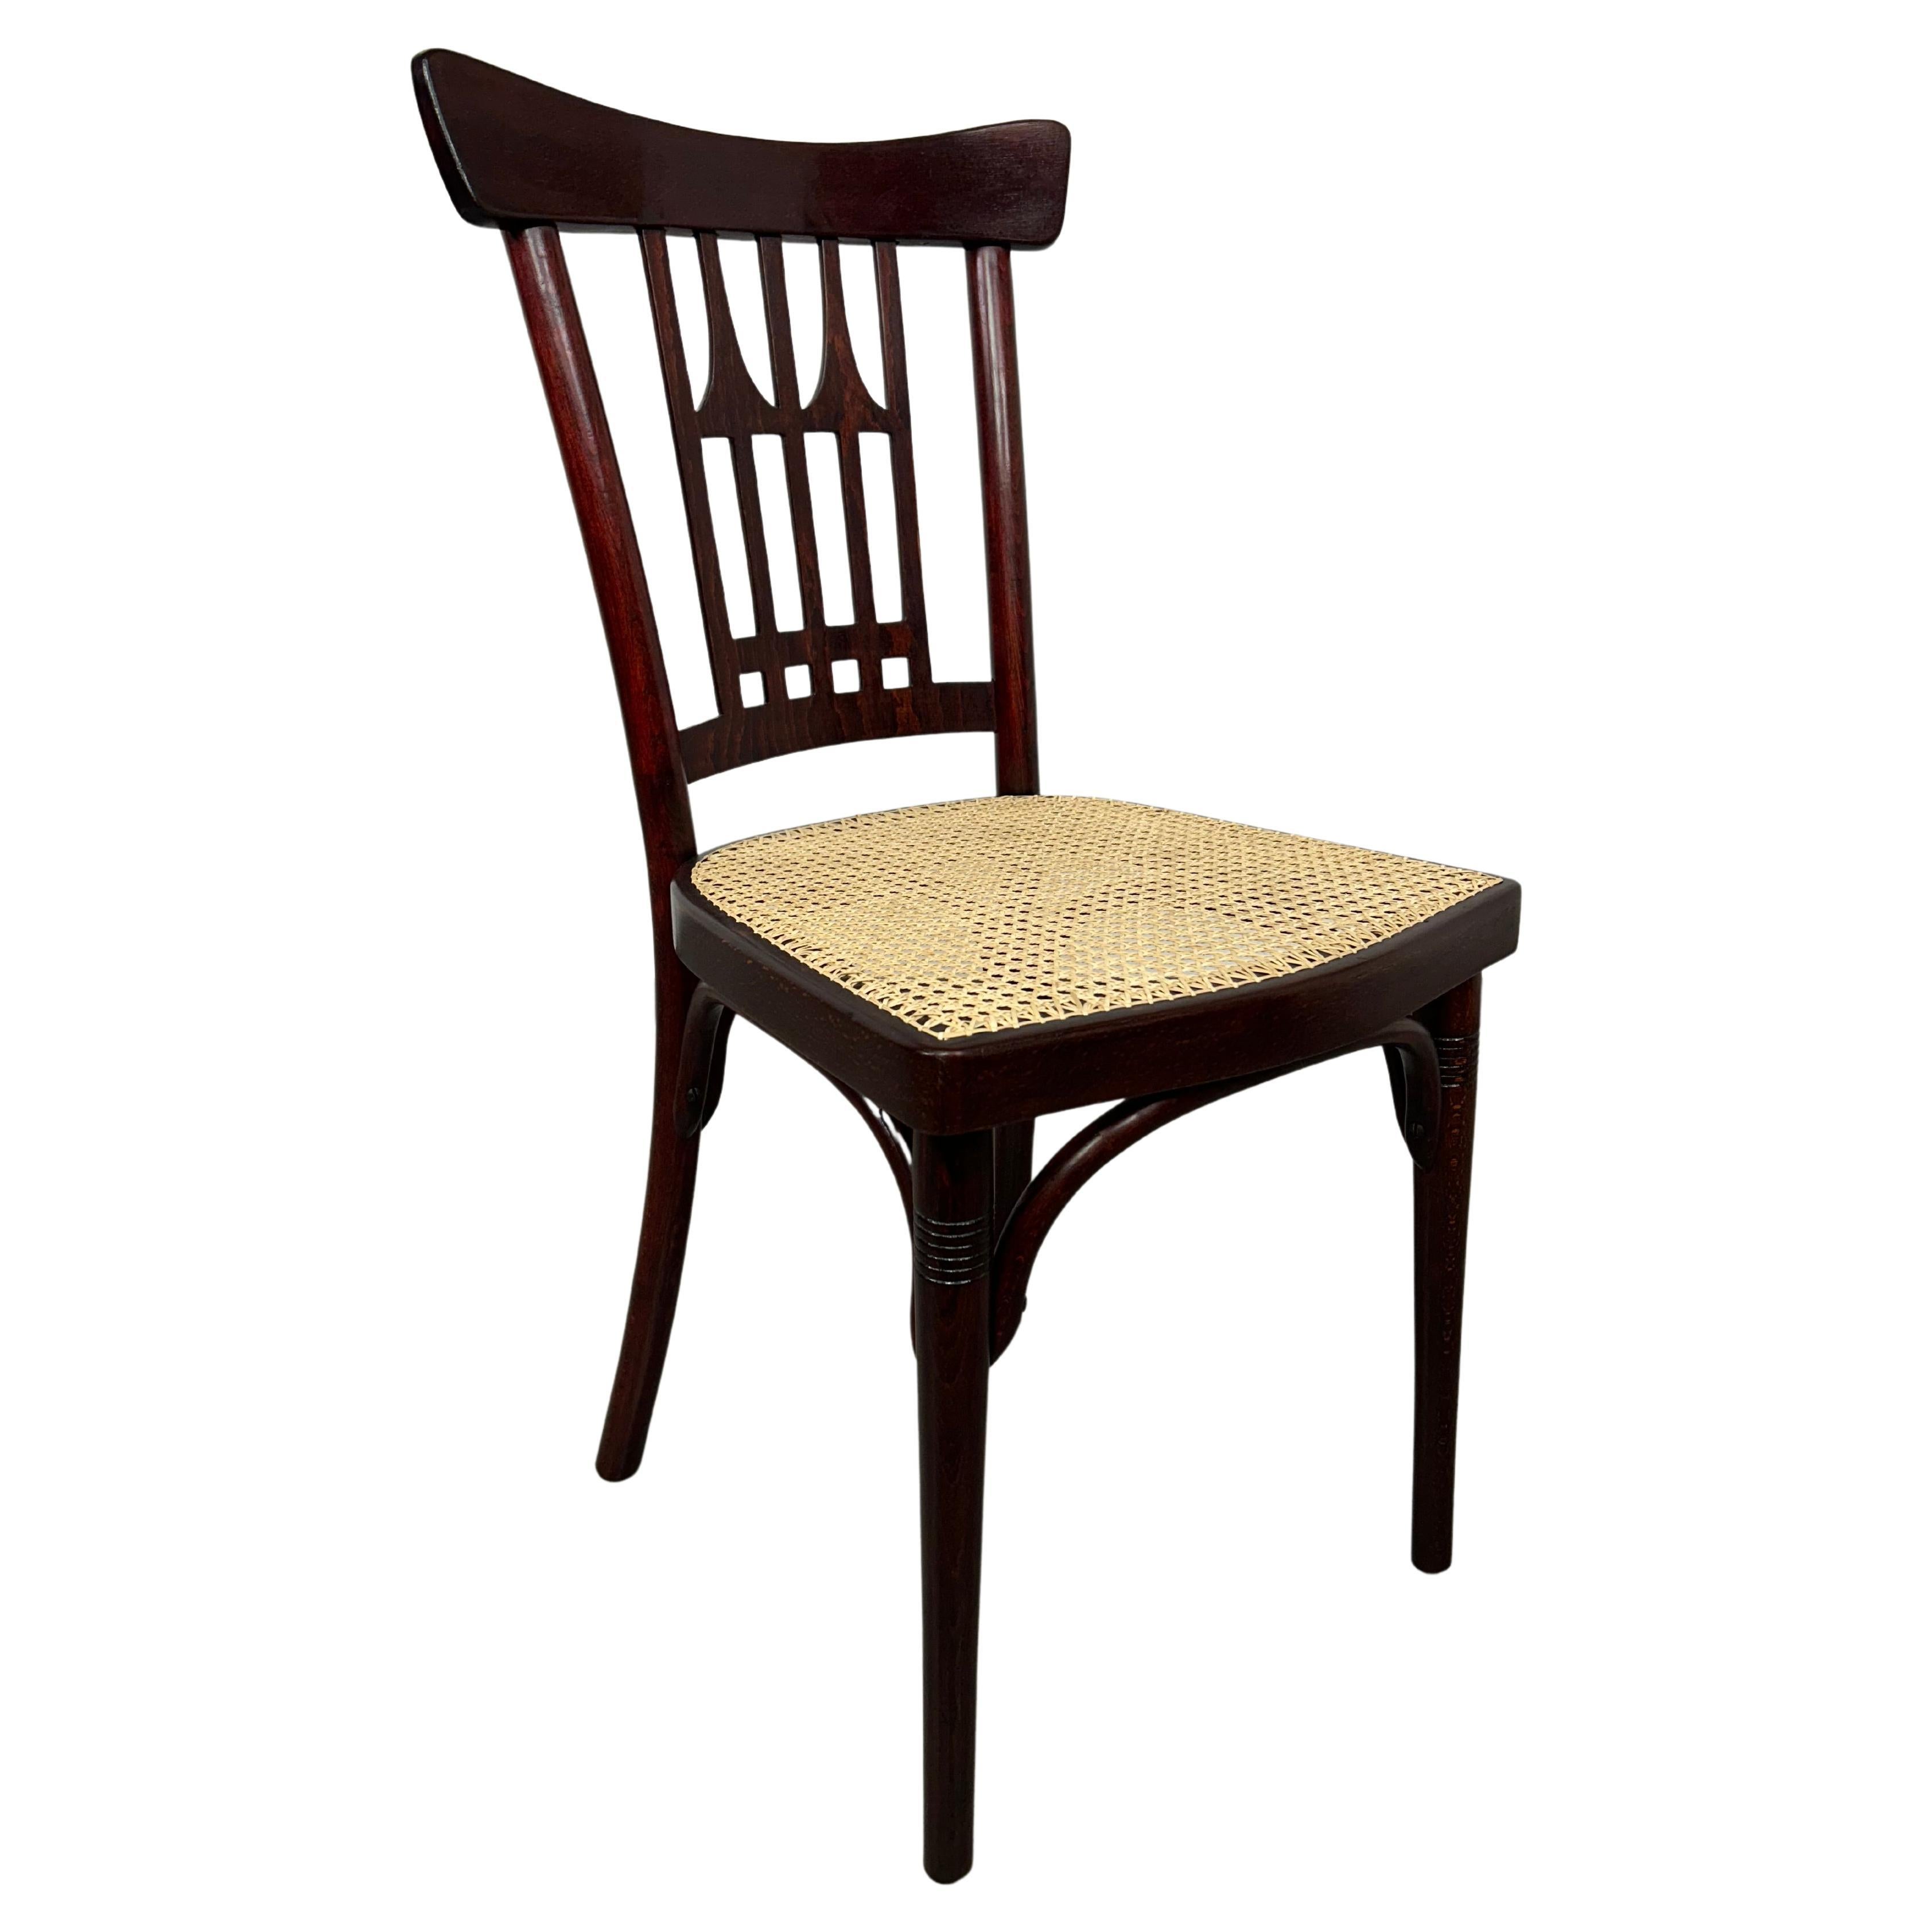 Vienna secession dining chair by Otto Wagner for J&J Kohn